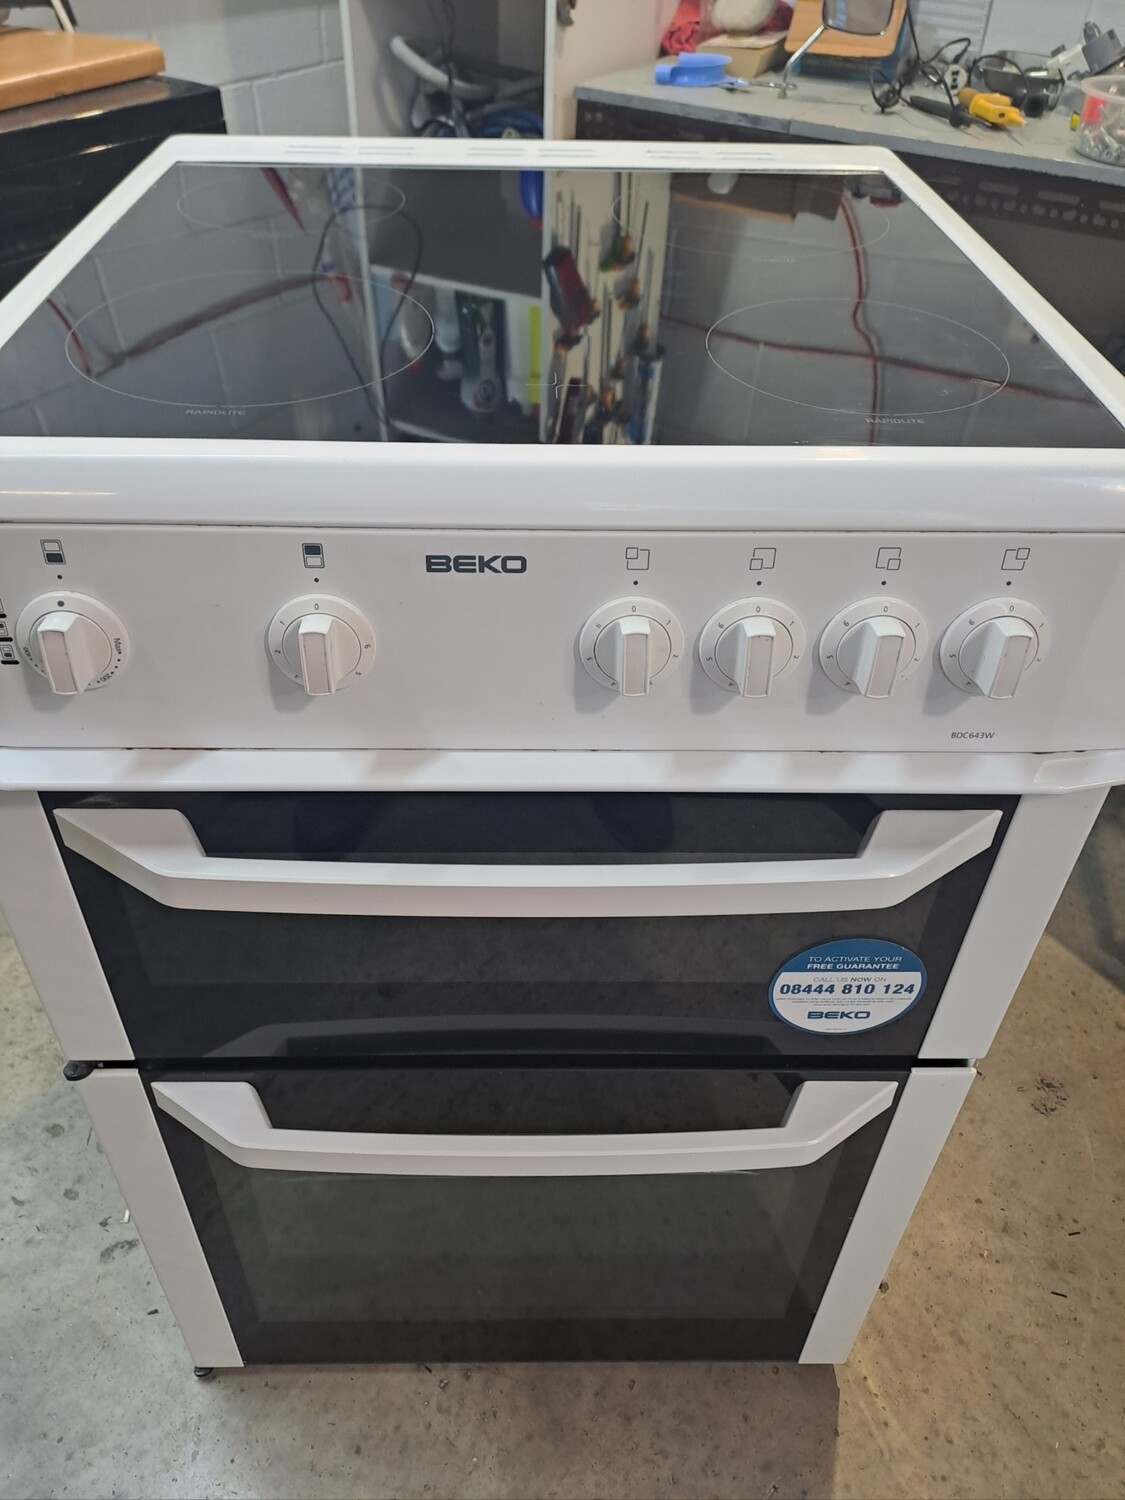 Beko BDC643W 60cm Electric Cooker Twin Cavity Ceramic Hob - White - Refurbished 6 Month Guarantee. This item is located in our Whitby Road Shop 